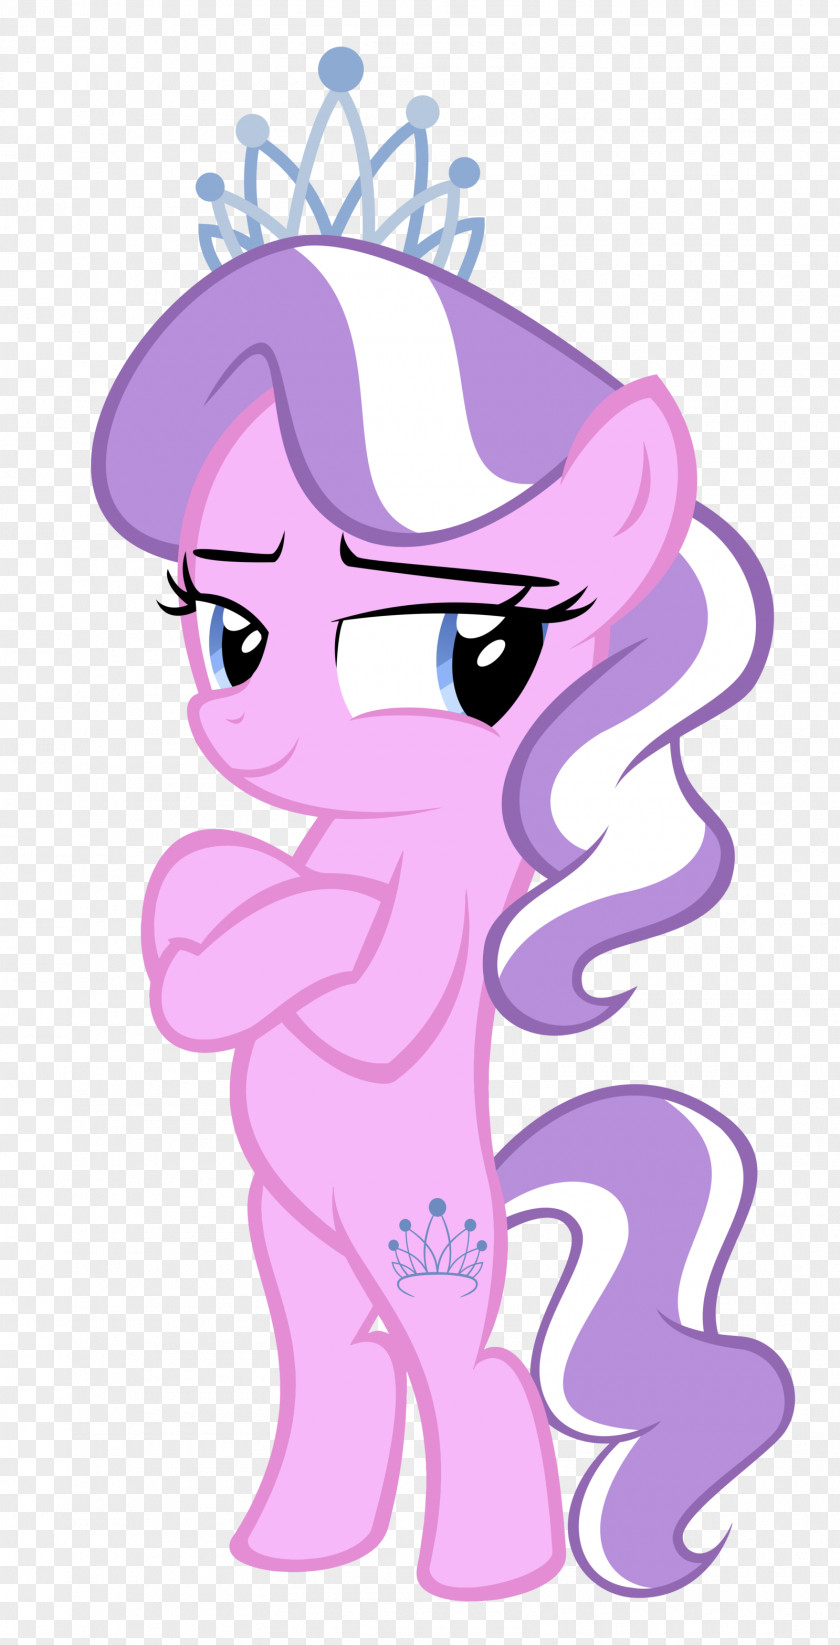 What Are You Thinking About When You're Standing? Pony Pinkie Pie Cartoon Fan Art PNG